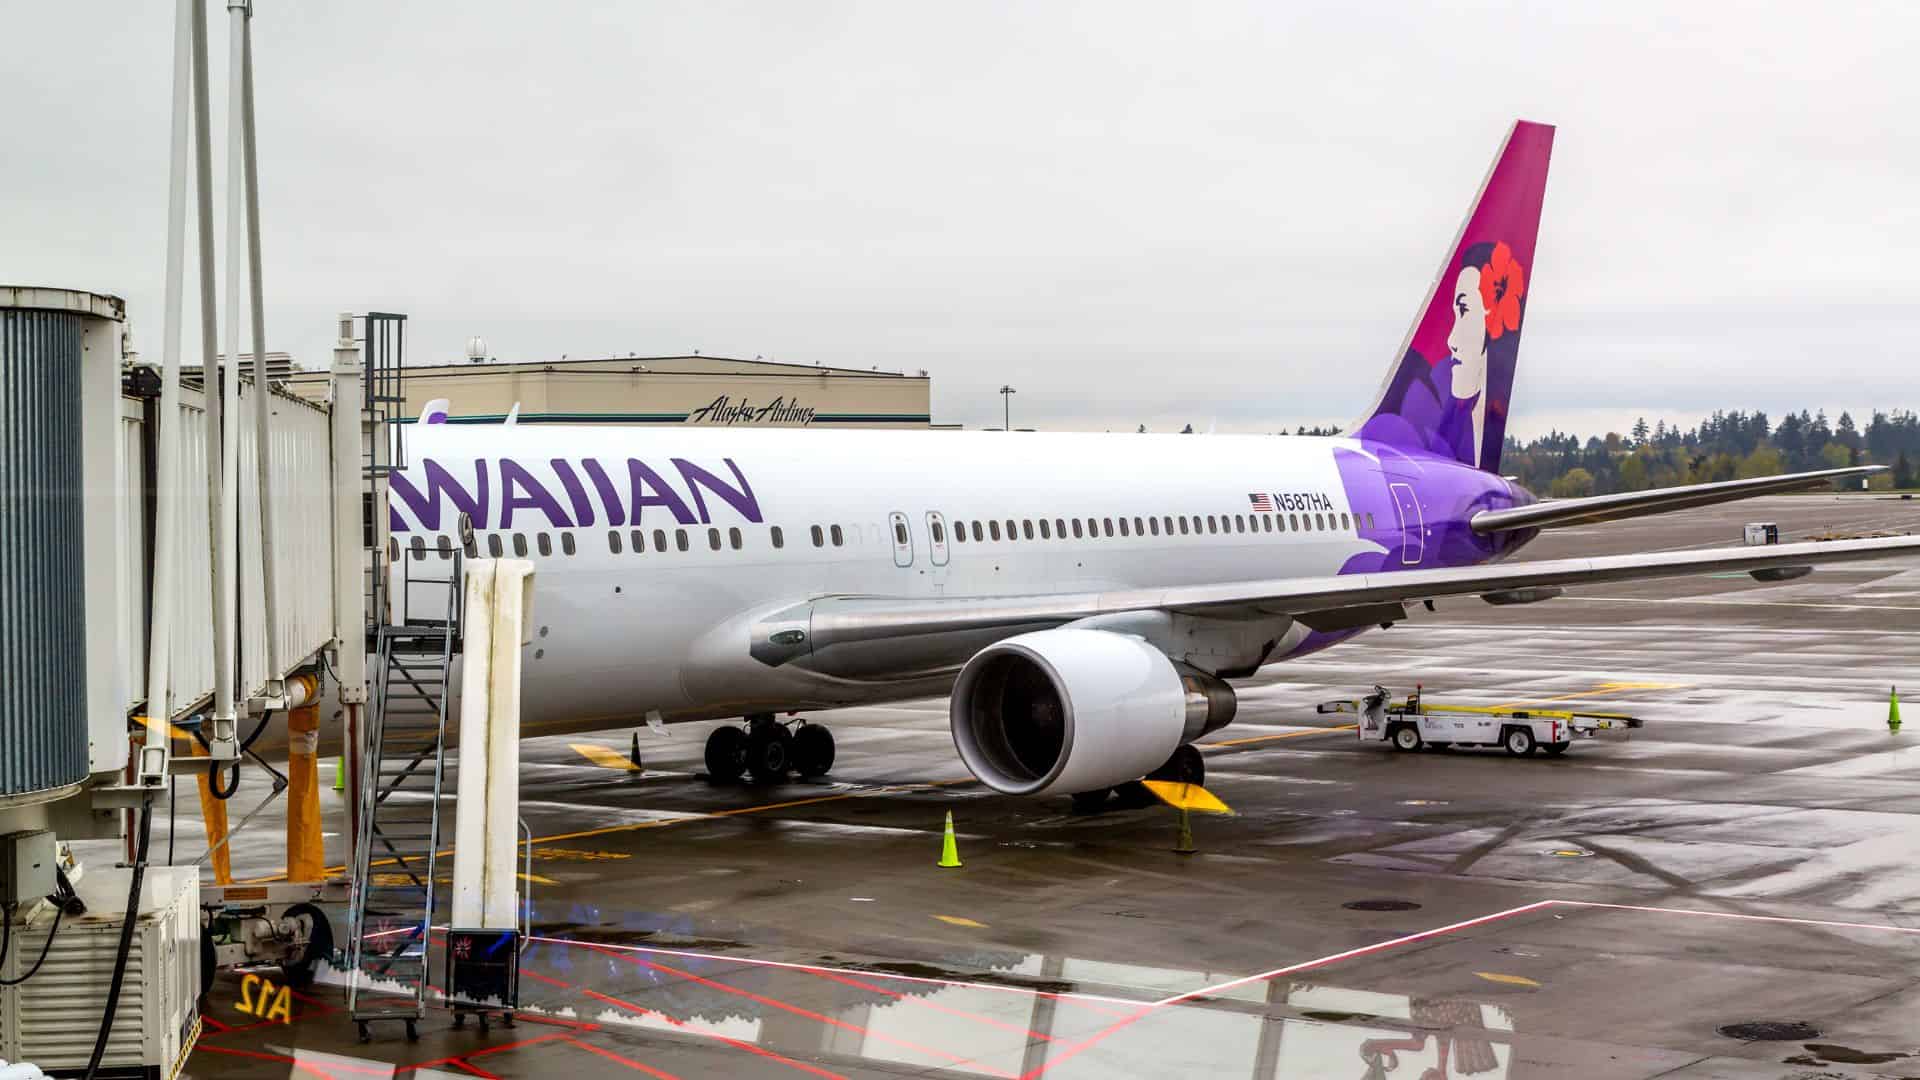 Does Hawaiian Airlines Have Inflight Wifi?